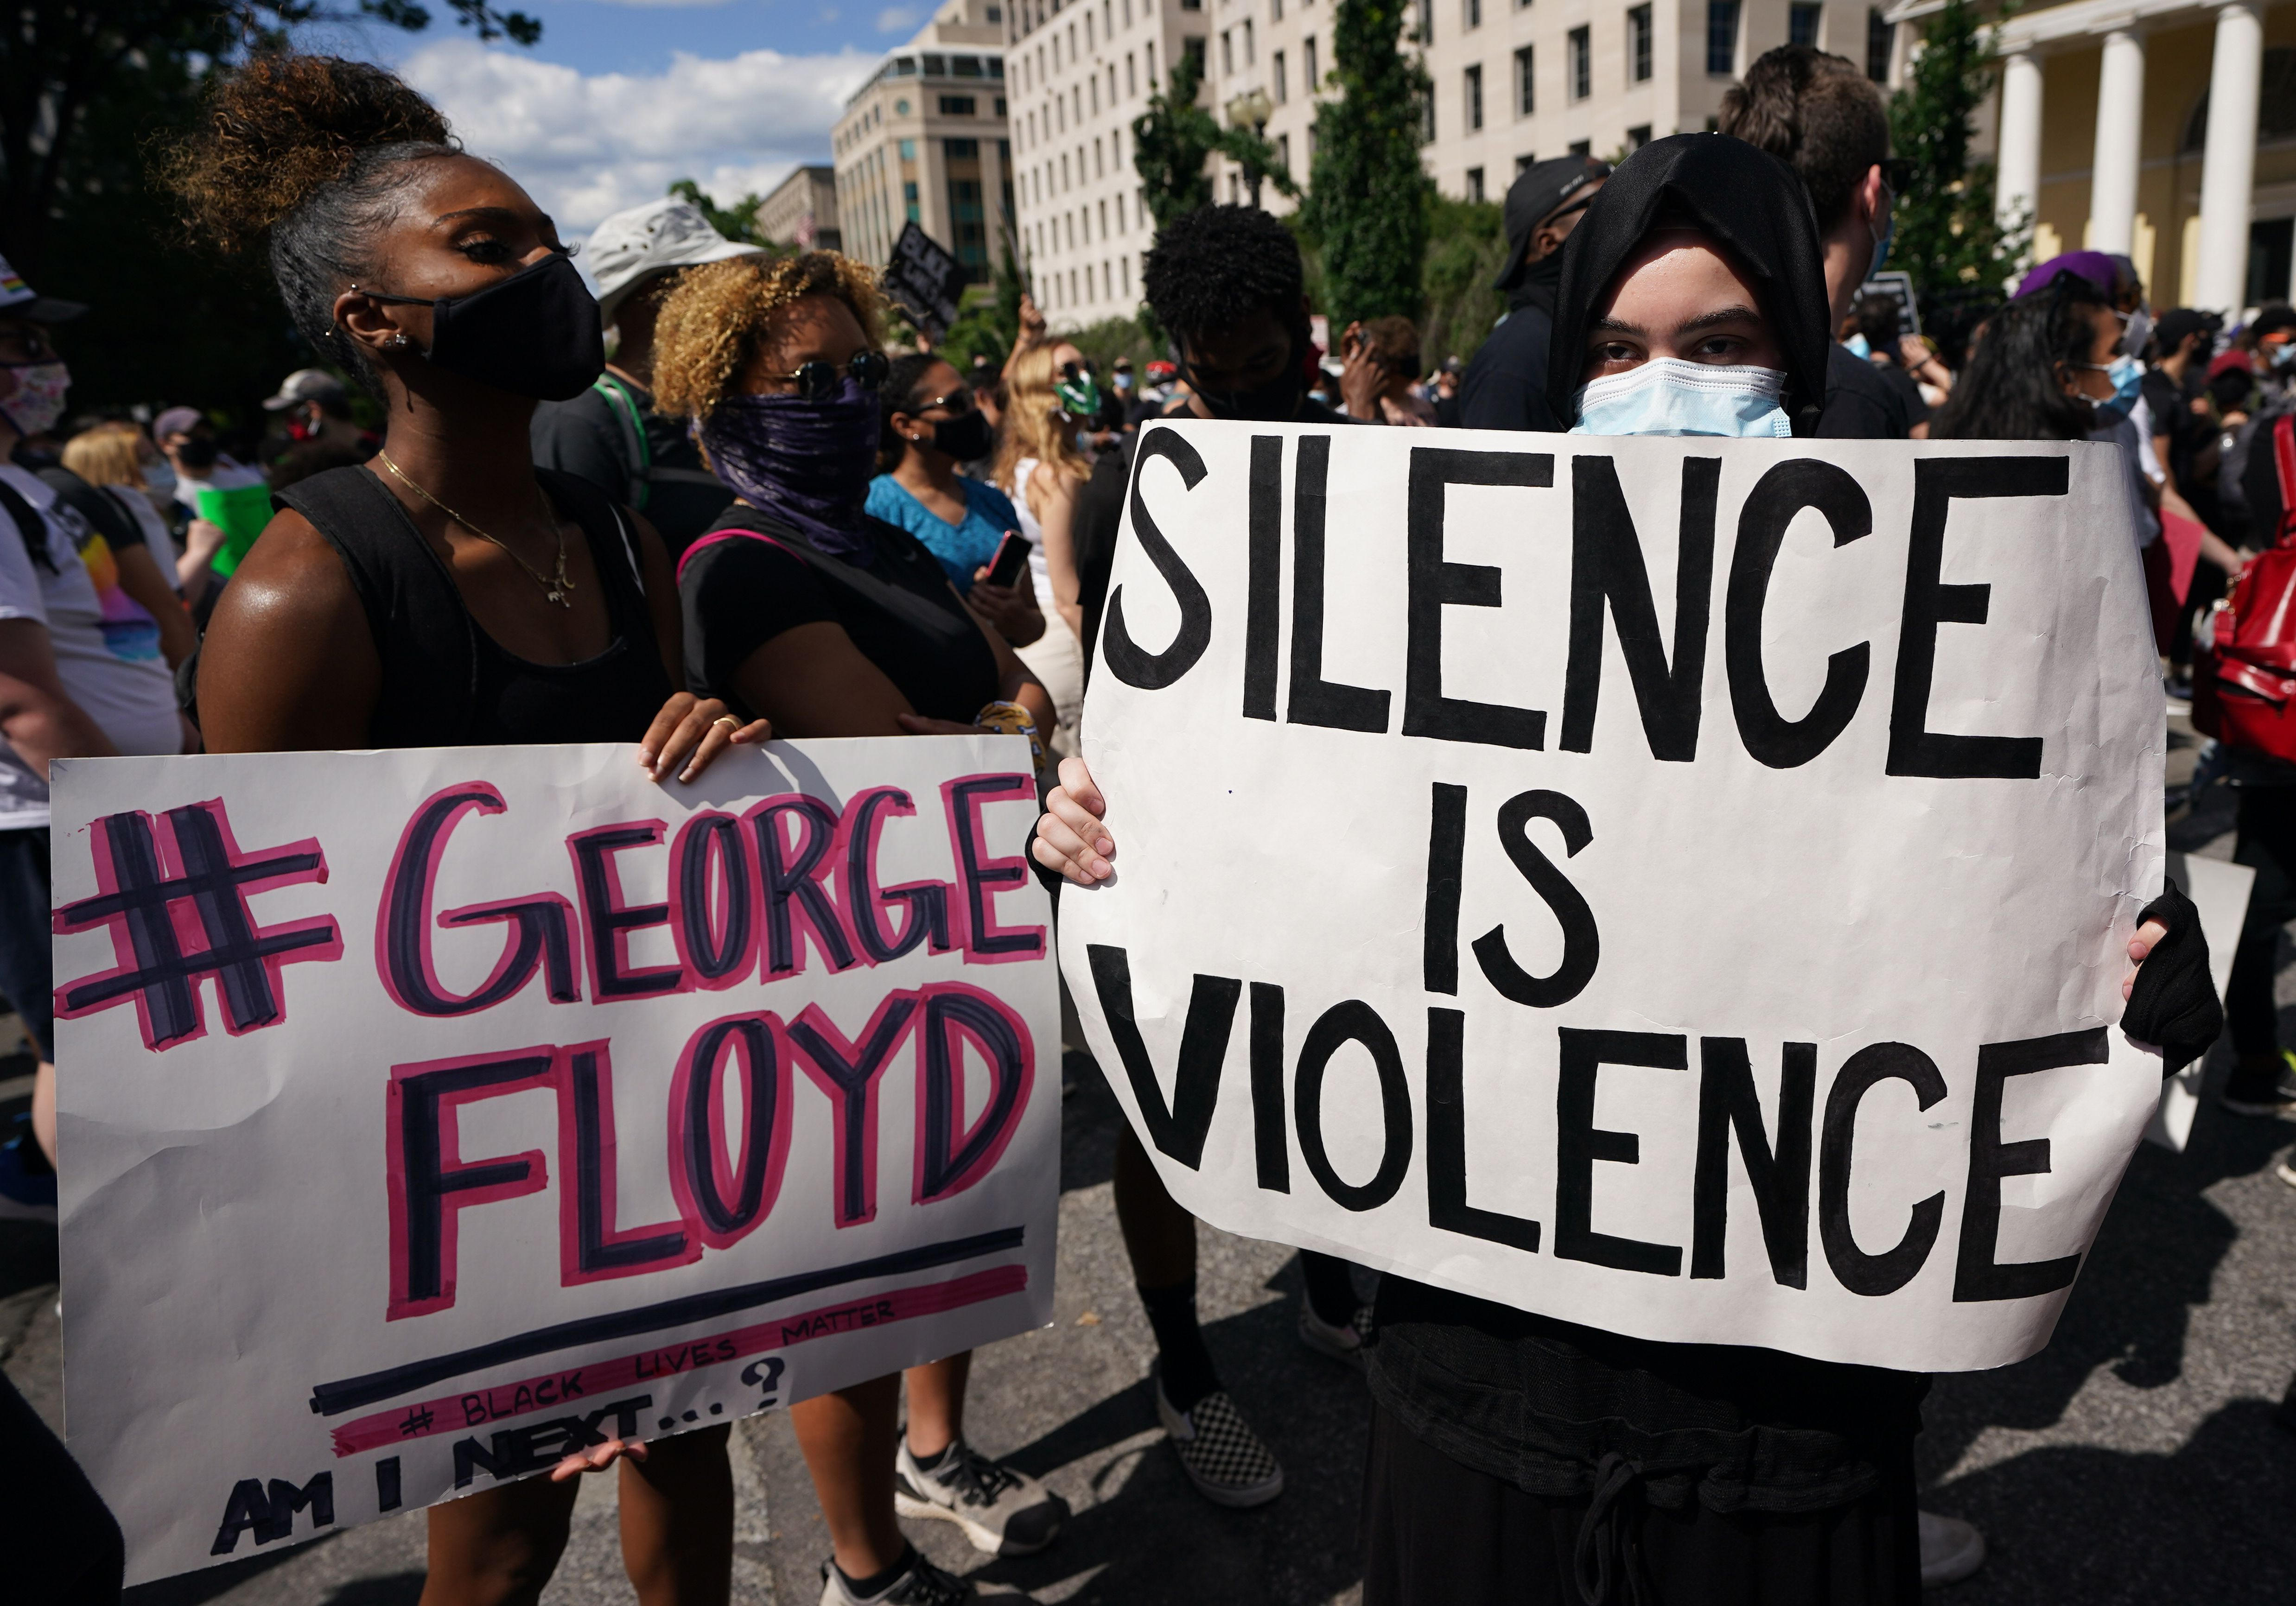 People protesting the death of George Floyd hold up placards in a street near the White House on May 31, 2020 in Washington, DC. 